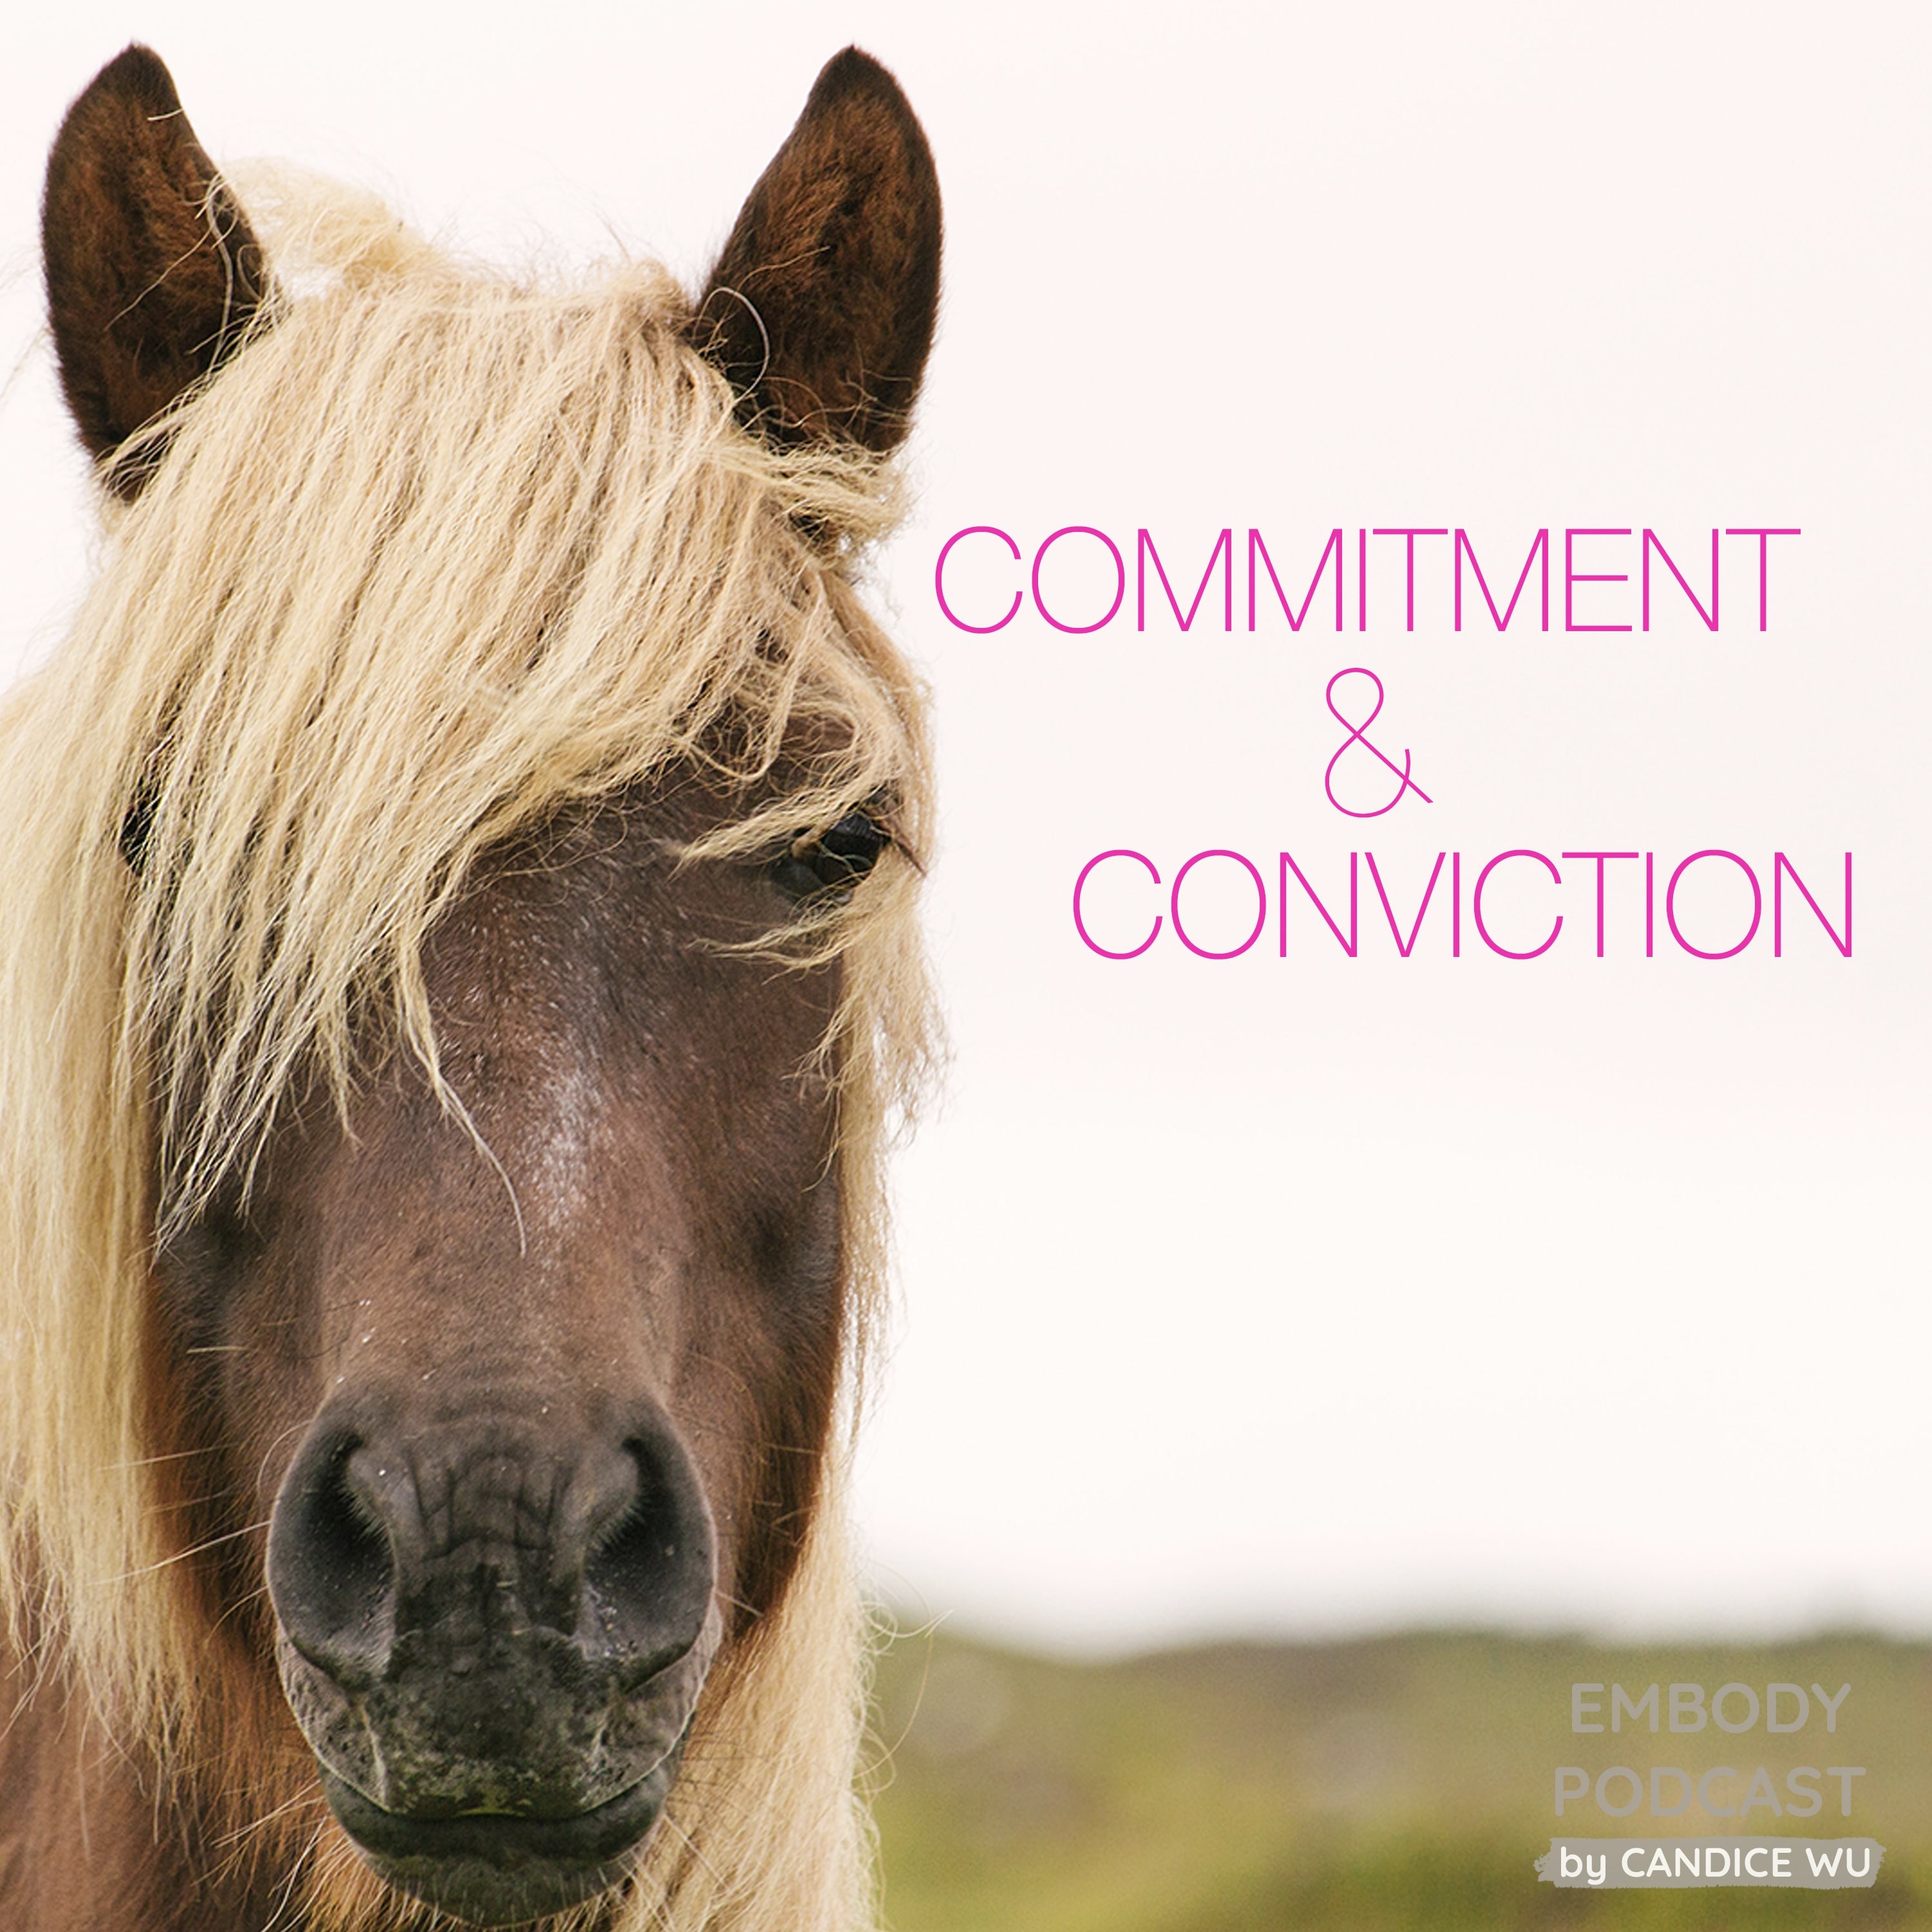 38: Commitment & Conviction: Being Unruffled in Collaborating With the Universe